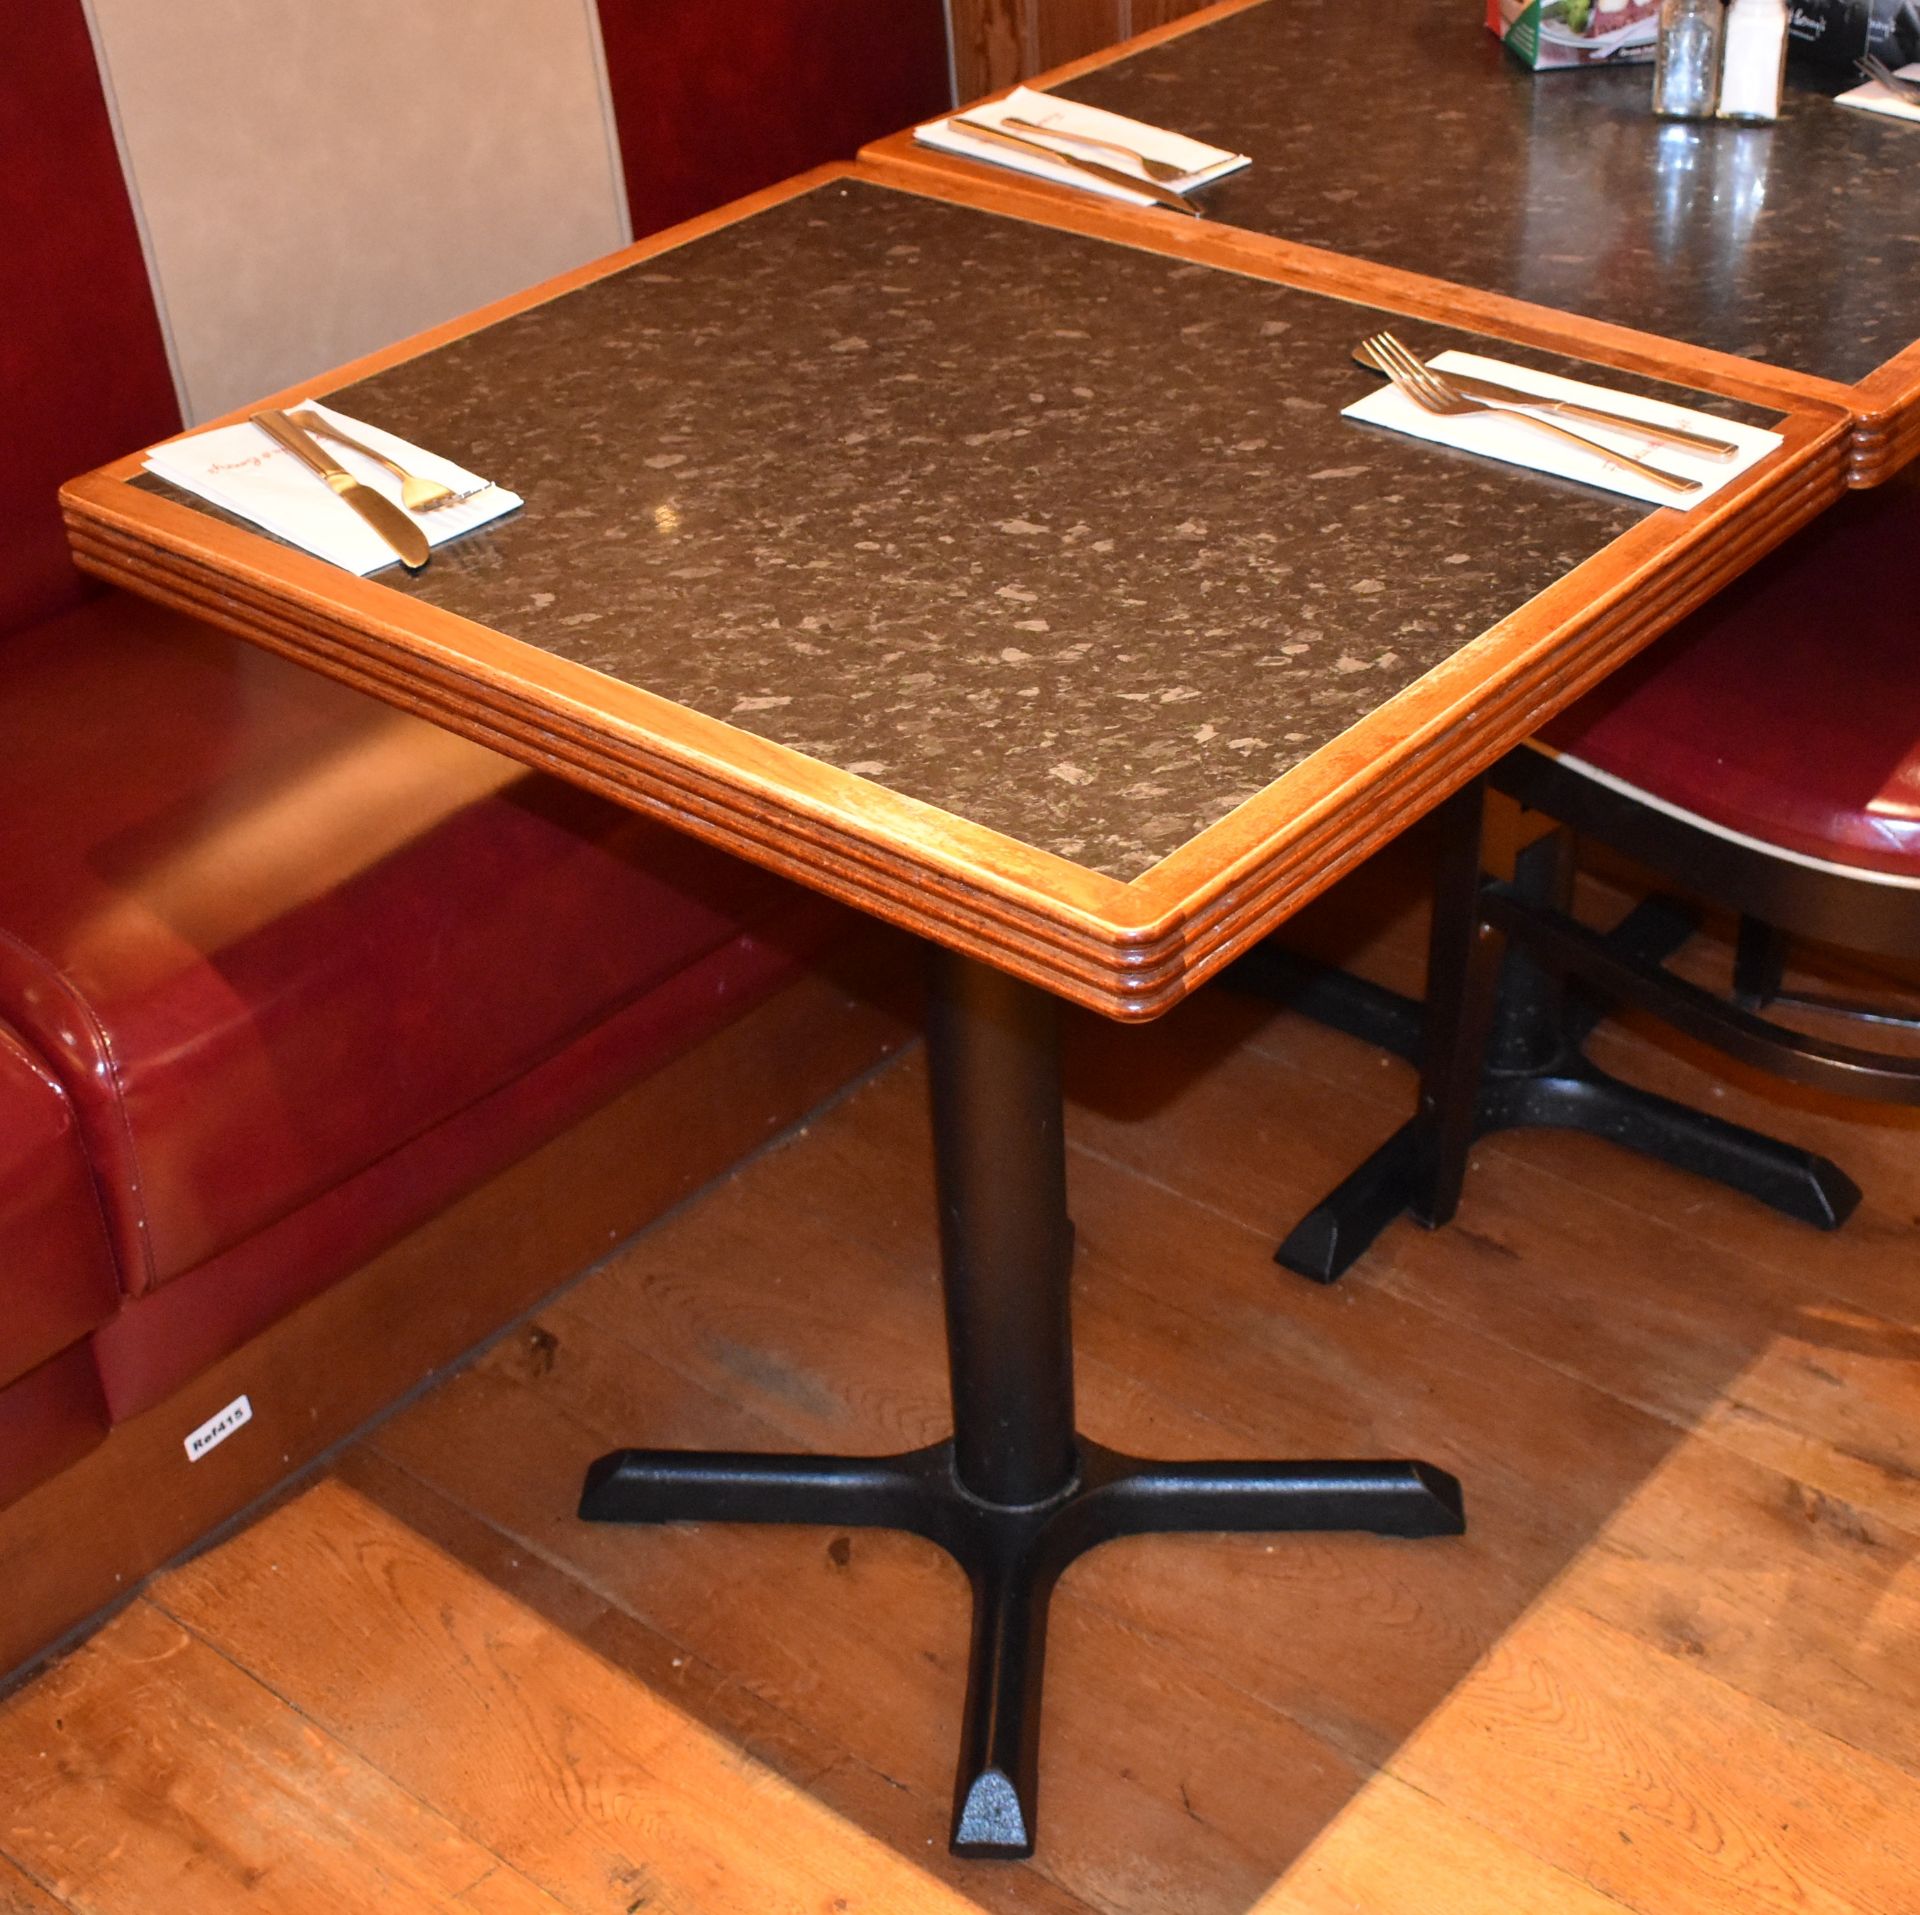 4 x Restaurant Bistro Tables With Granite Effect Tops and Cast Iron Bases - From American Italian - Image 6 of 7